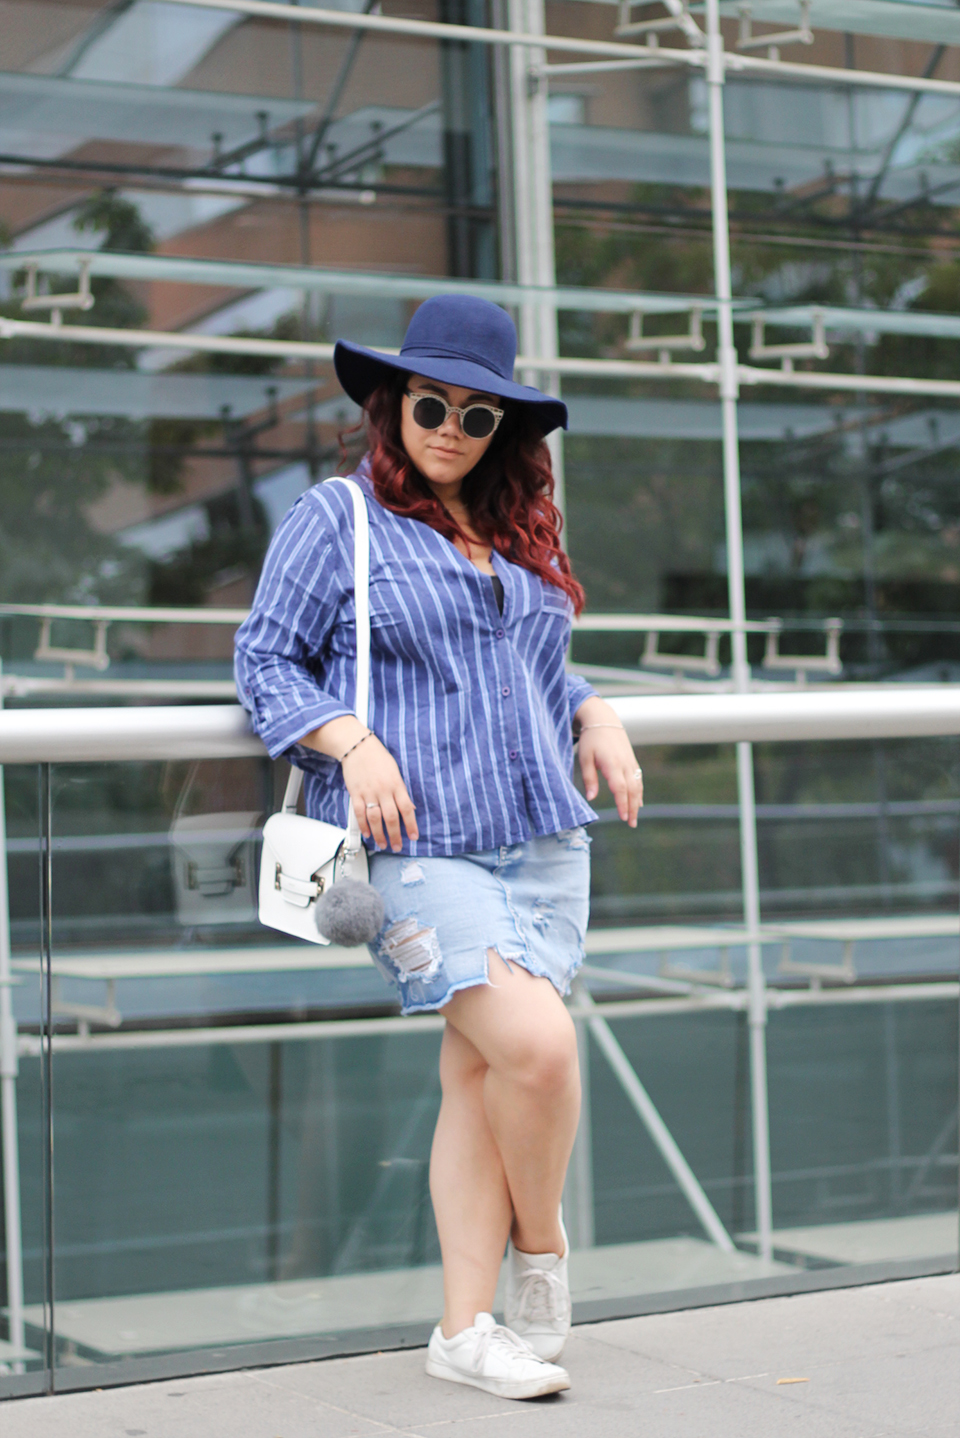 fashion-blogger-denim-skirt-forever21-yoins-blue-hat-lookchic-quay sunglasses-mexican-ripped-stripes